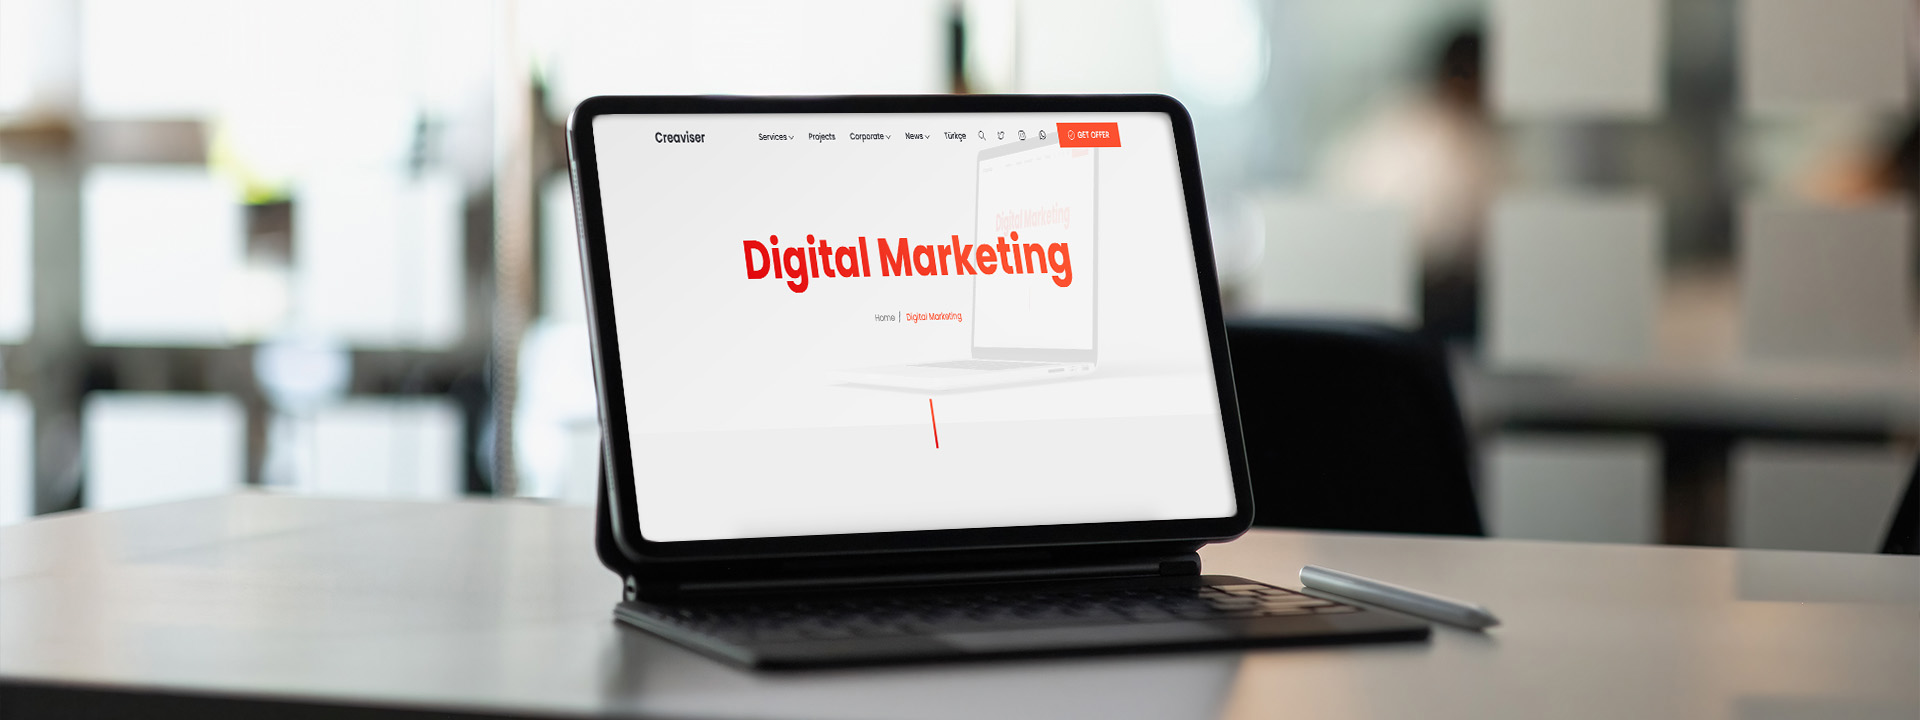 Digital Marketing Frequently Asked Questions